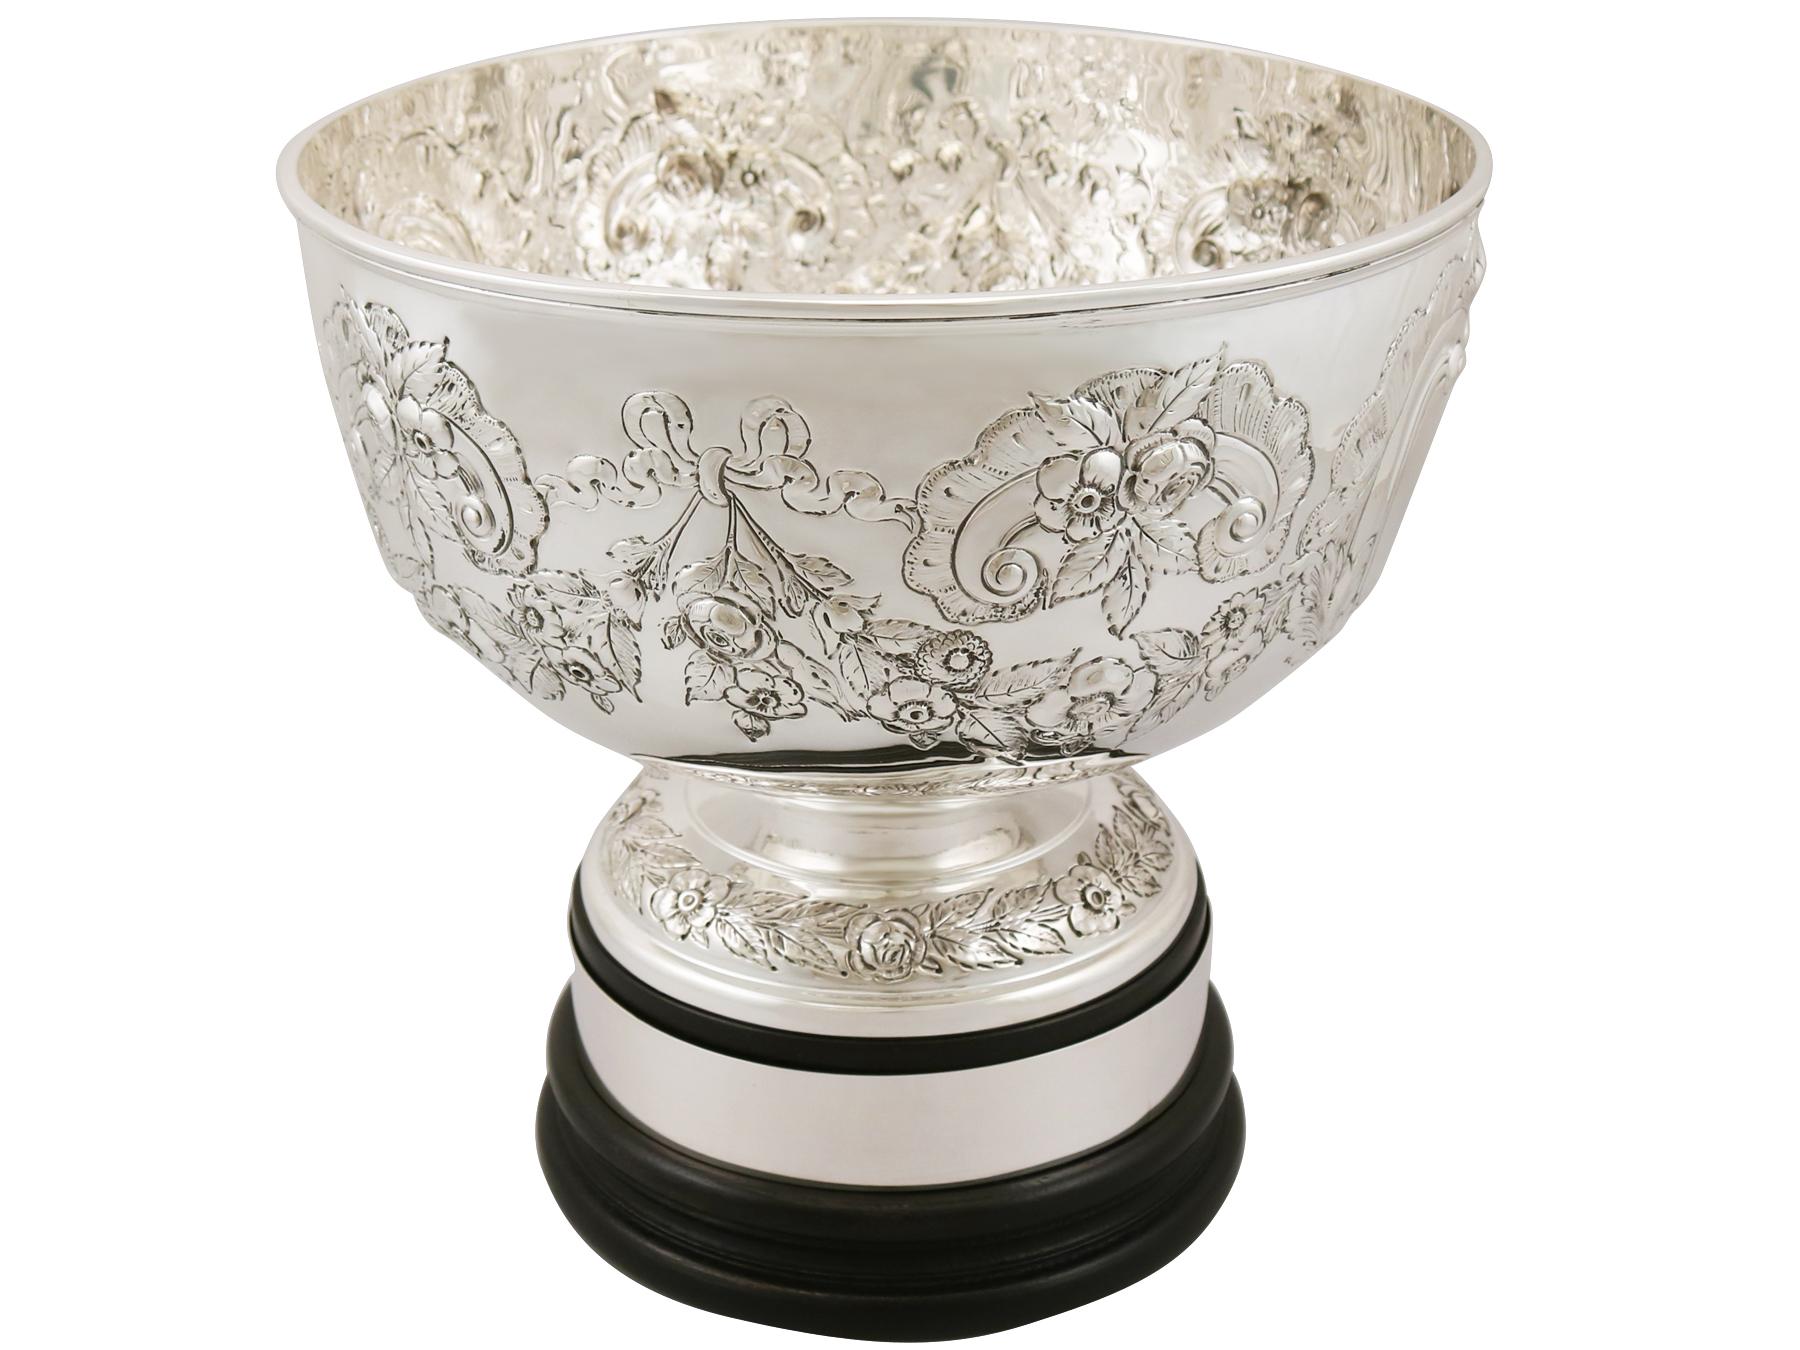 A fine and impressive antique Edwardian English sterling silver presentation bowl; an addition to our engravable presentation silverware collection

This fine antique Edwardian sterling silver presentation bowl has a plain circular rounded form